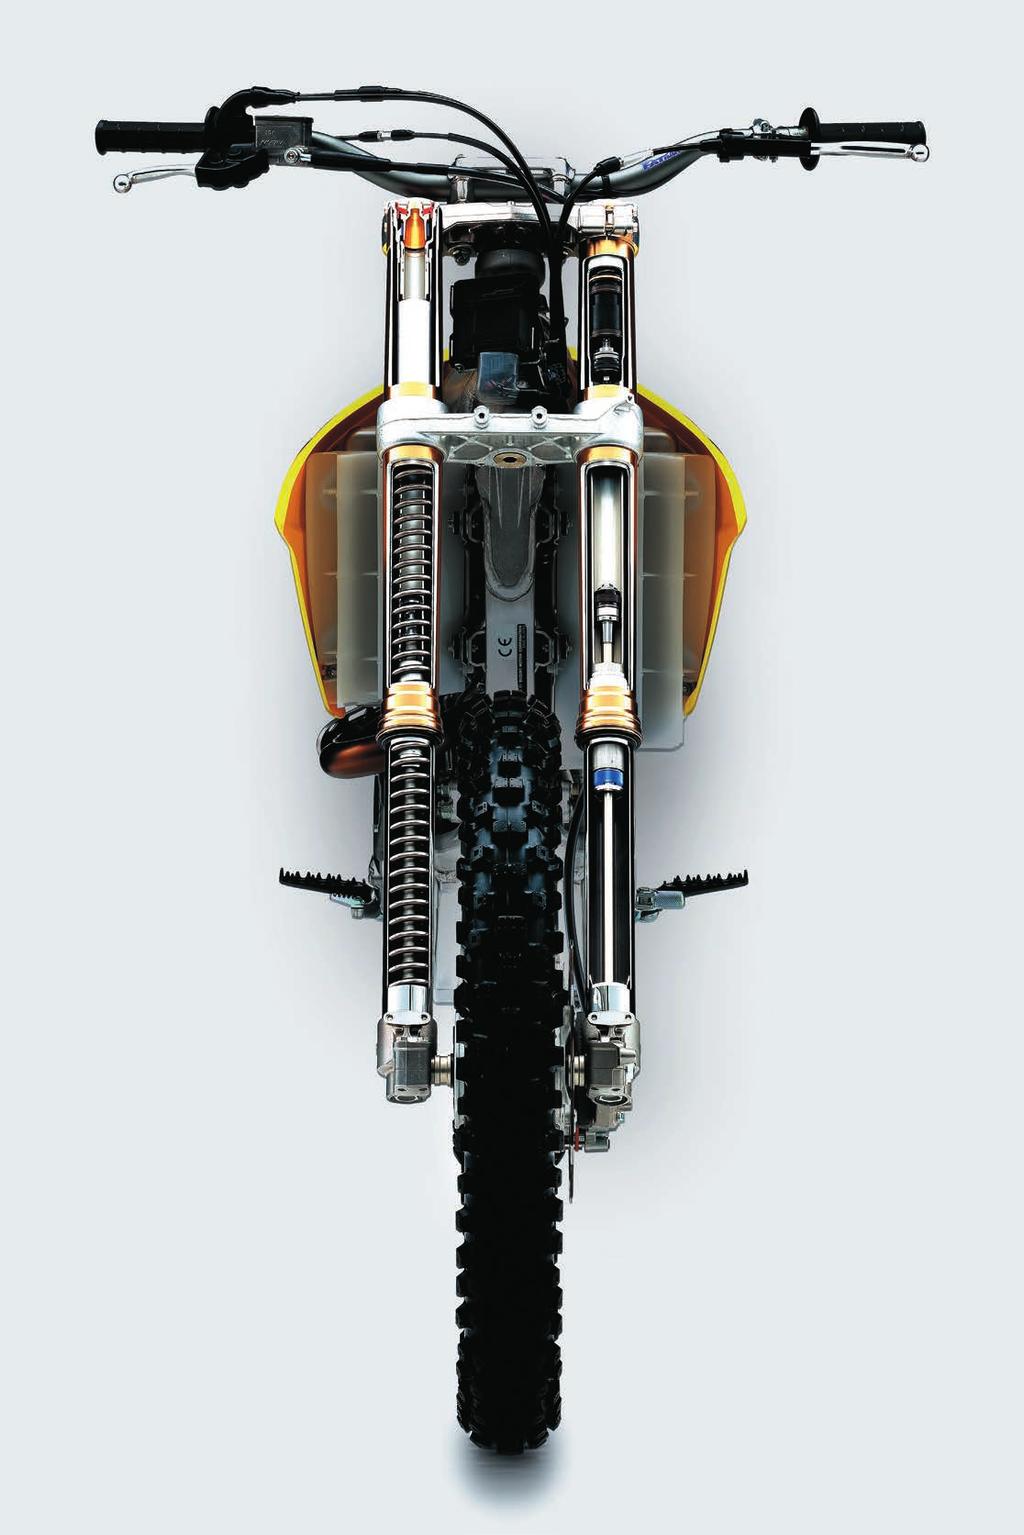 Chassis Design Concept Racers know that, in and out of a corner, precision cornering and racetrack stability has always been a prime feature of Suzuki s motocross bikes.